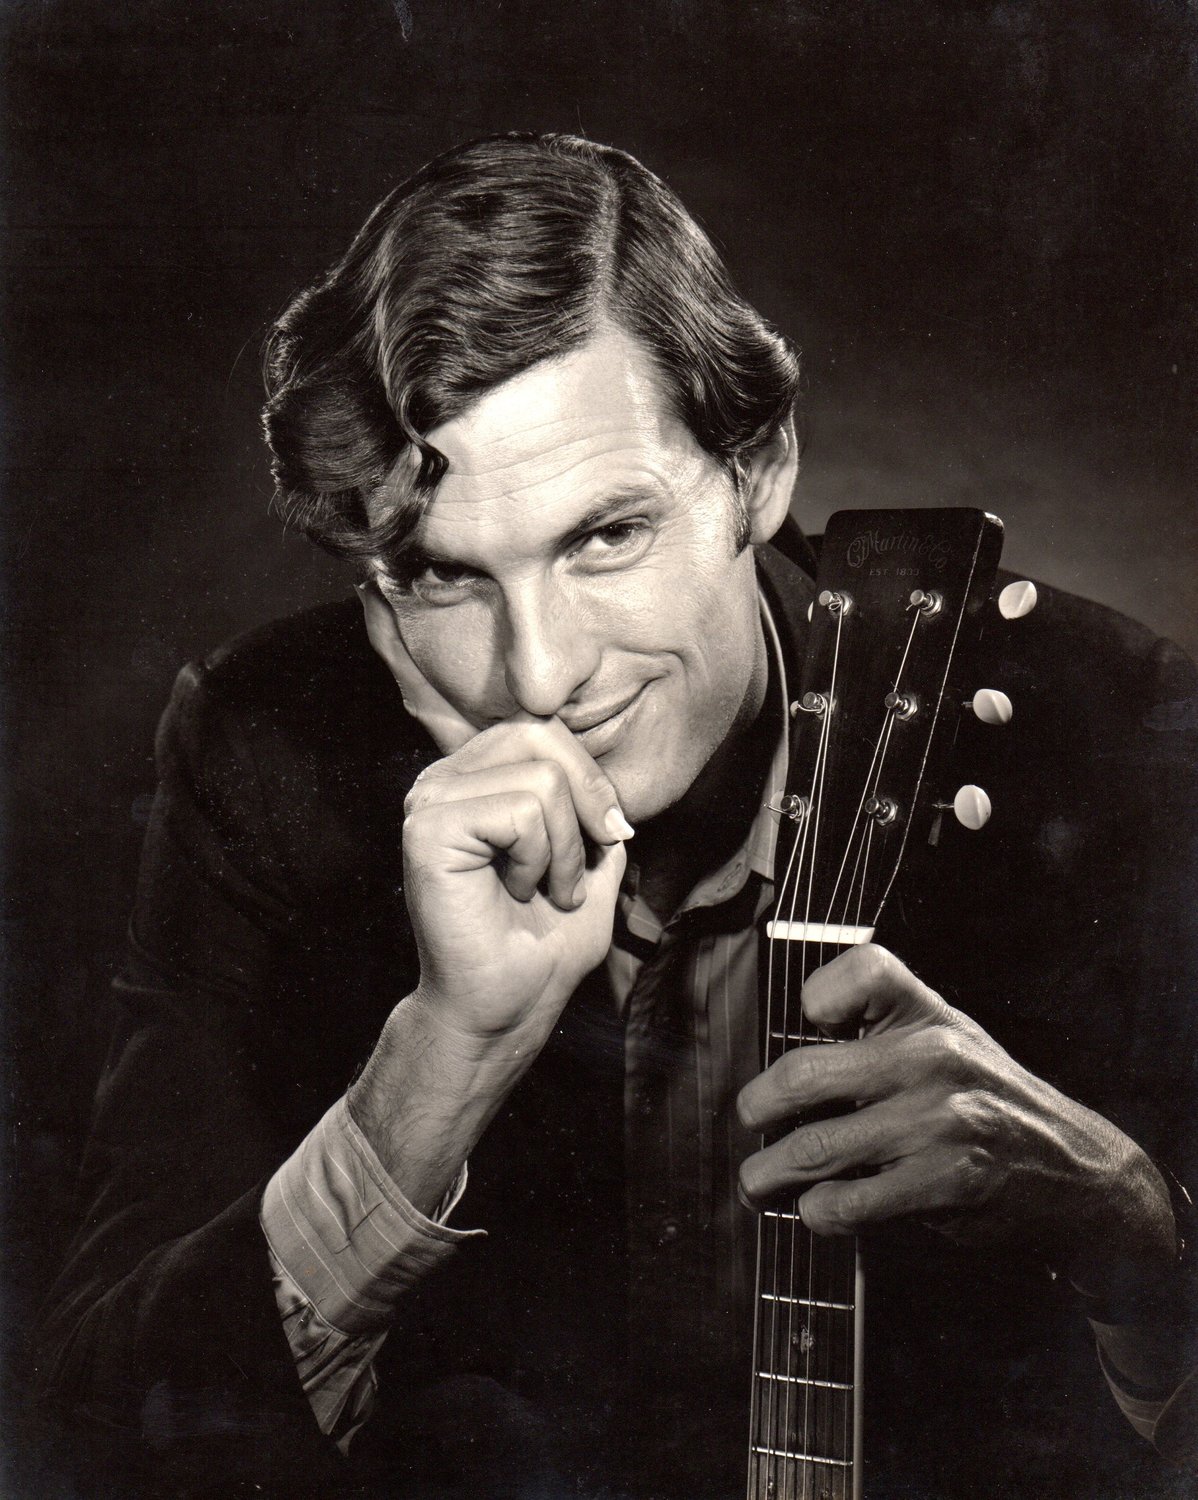 Recording artist, the late Gamble Rogers